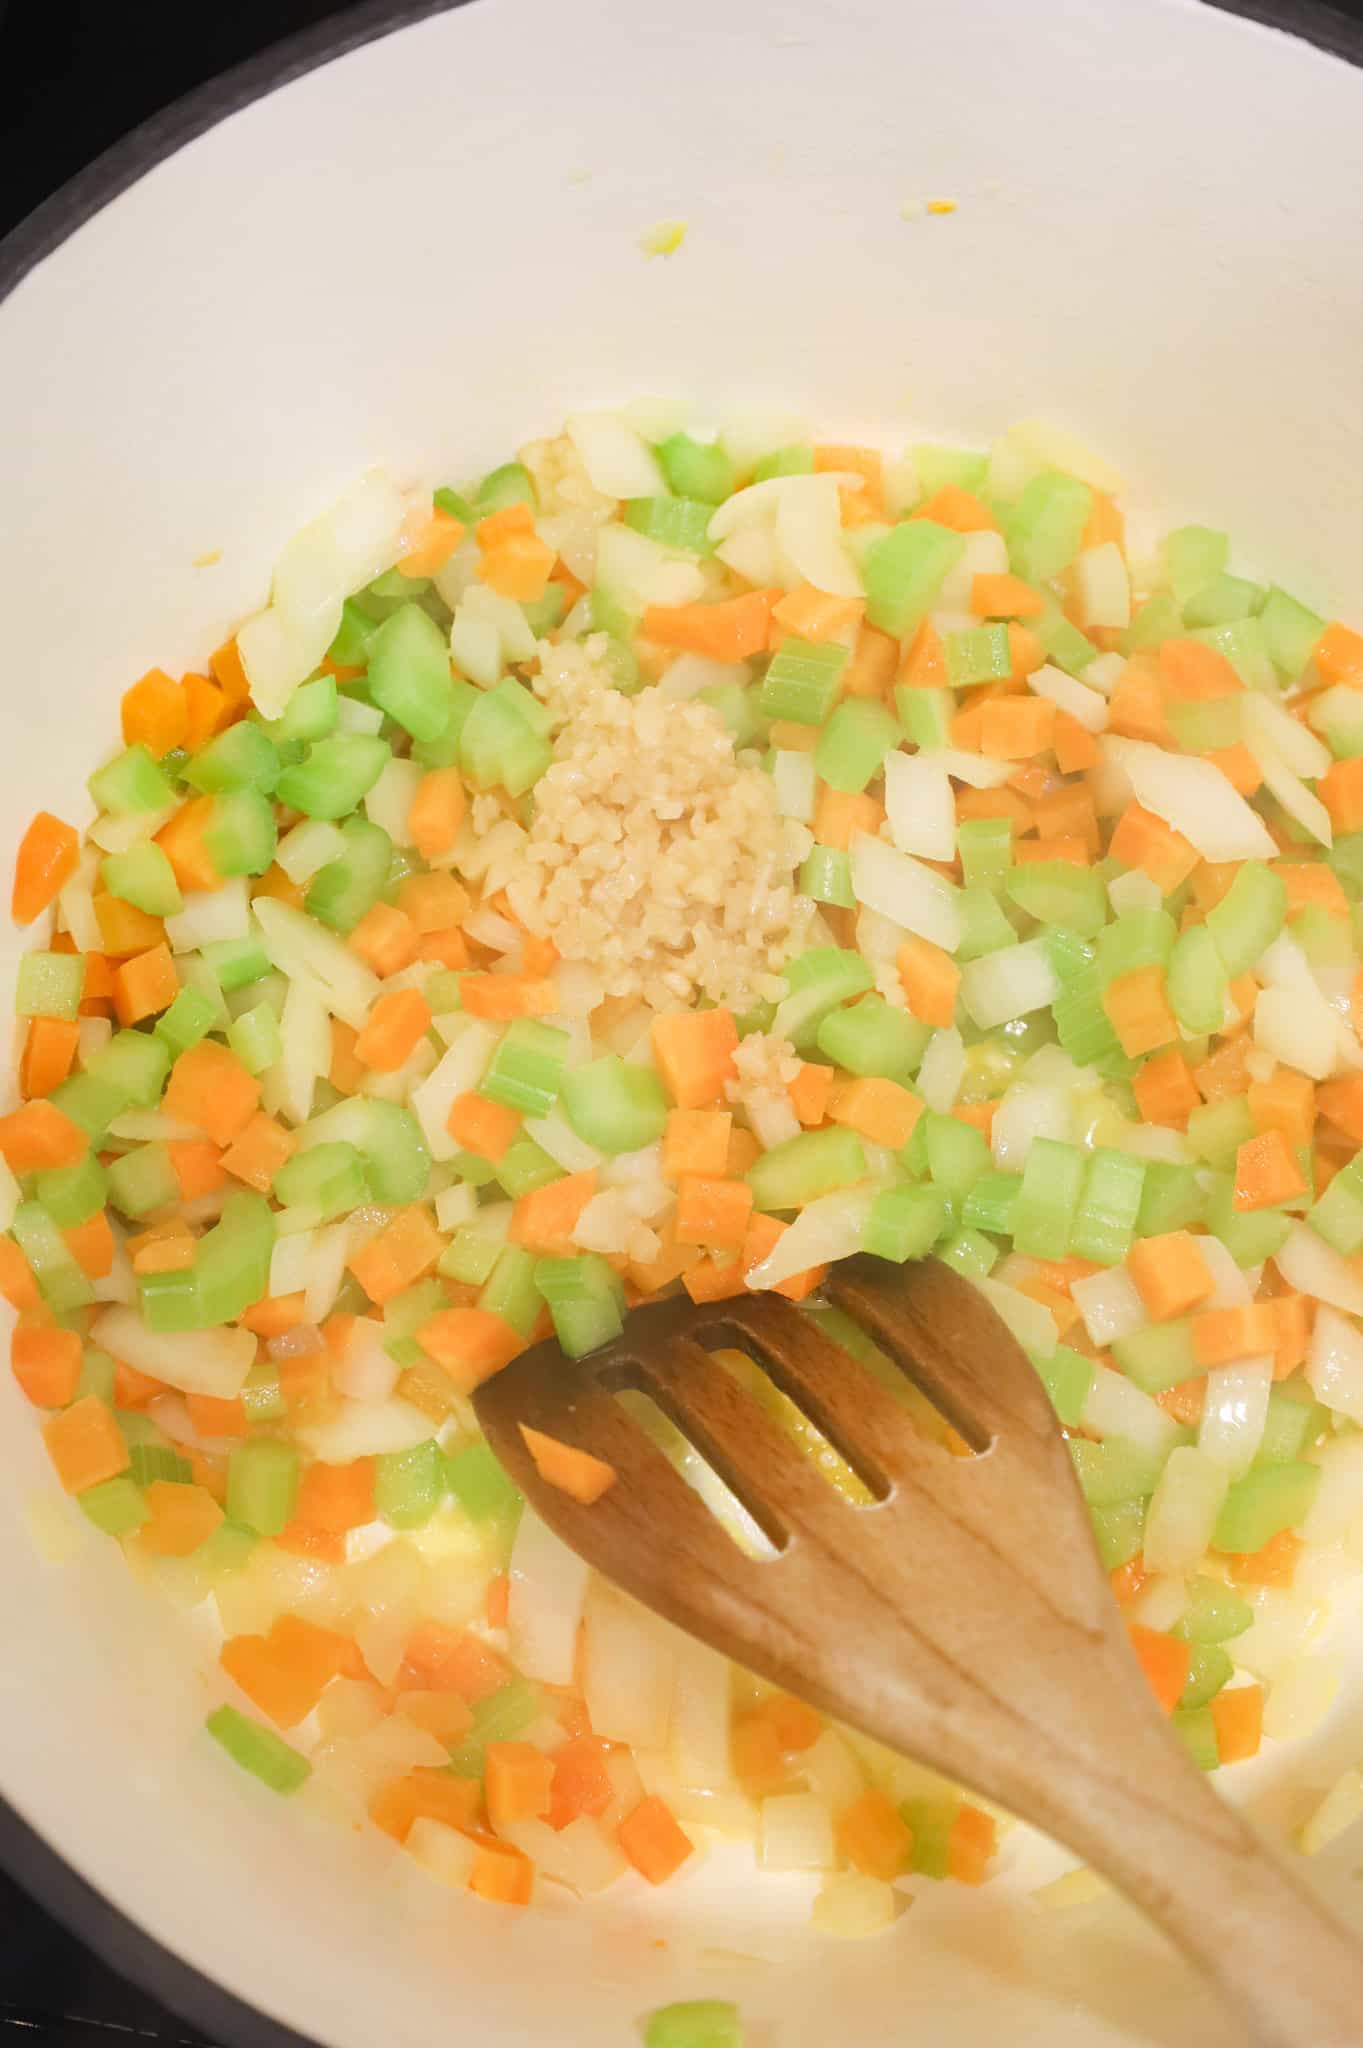 minced garlic added to pot with diced vegetables